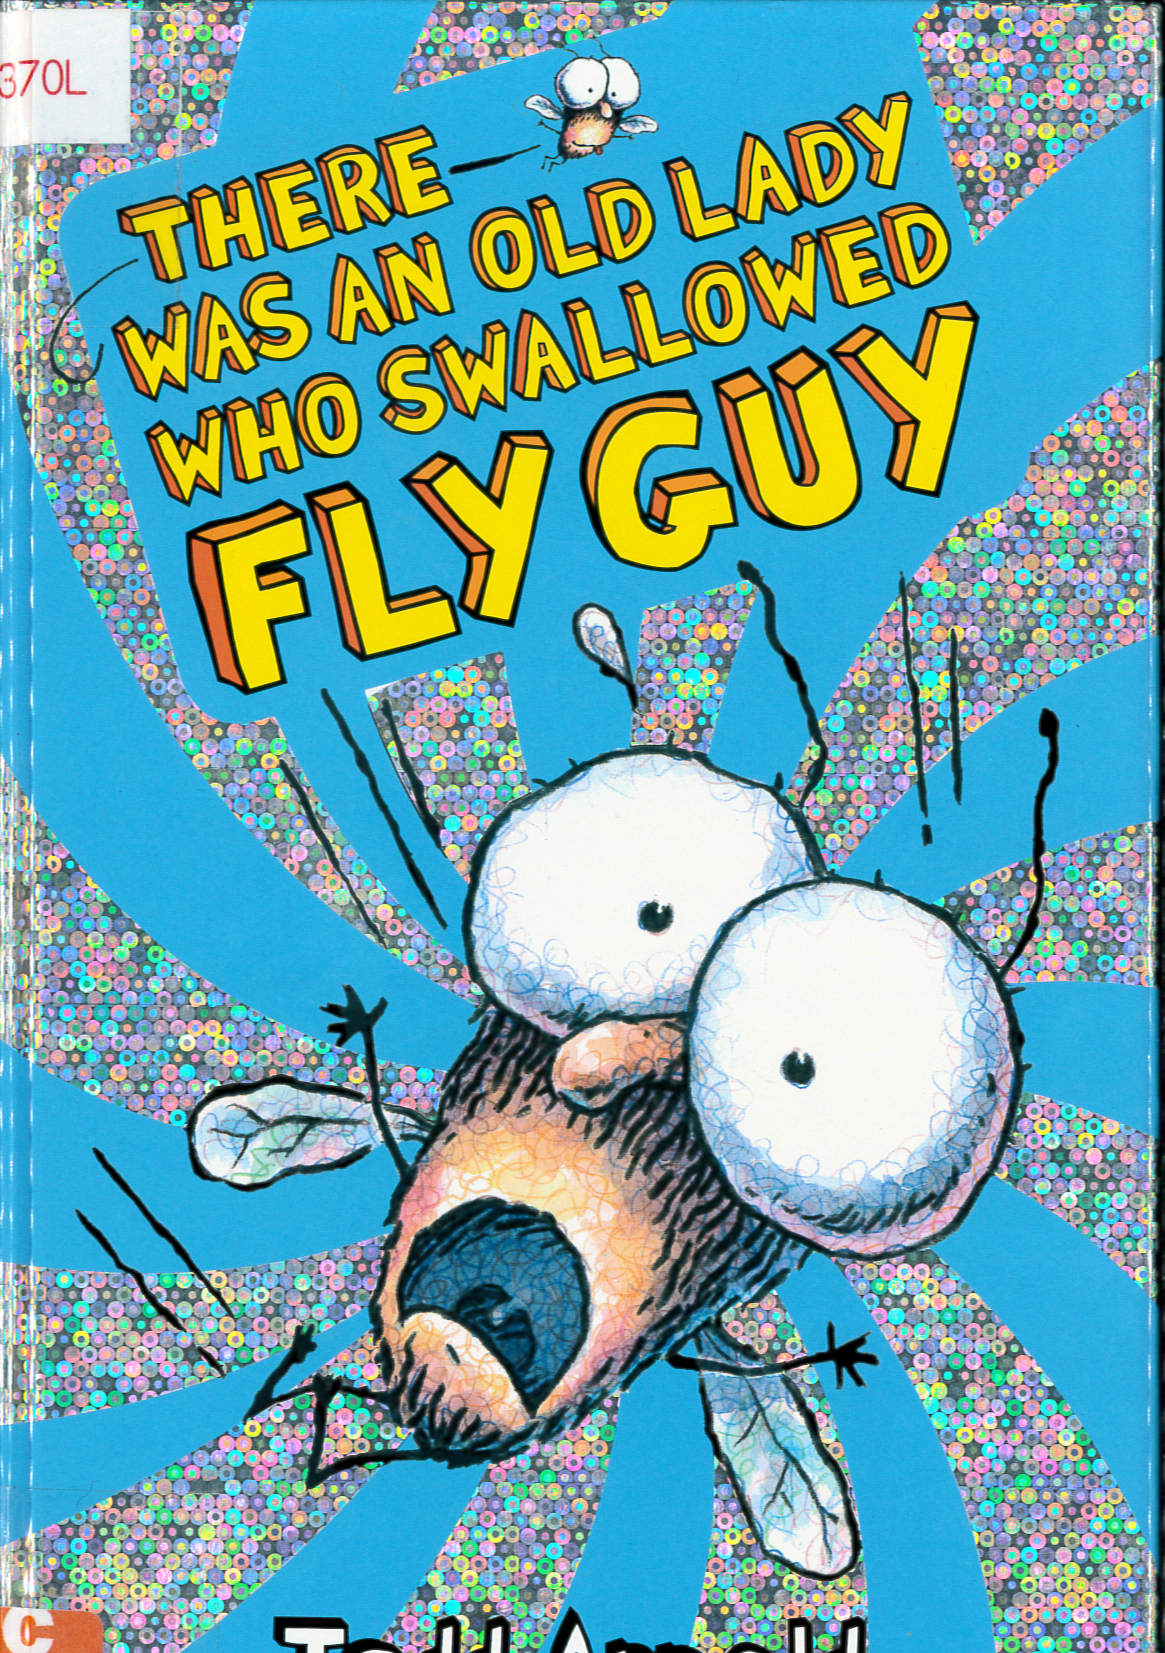 There was an old lady who swallowed fly guy /